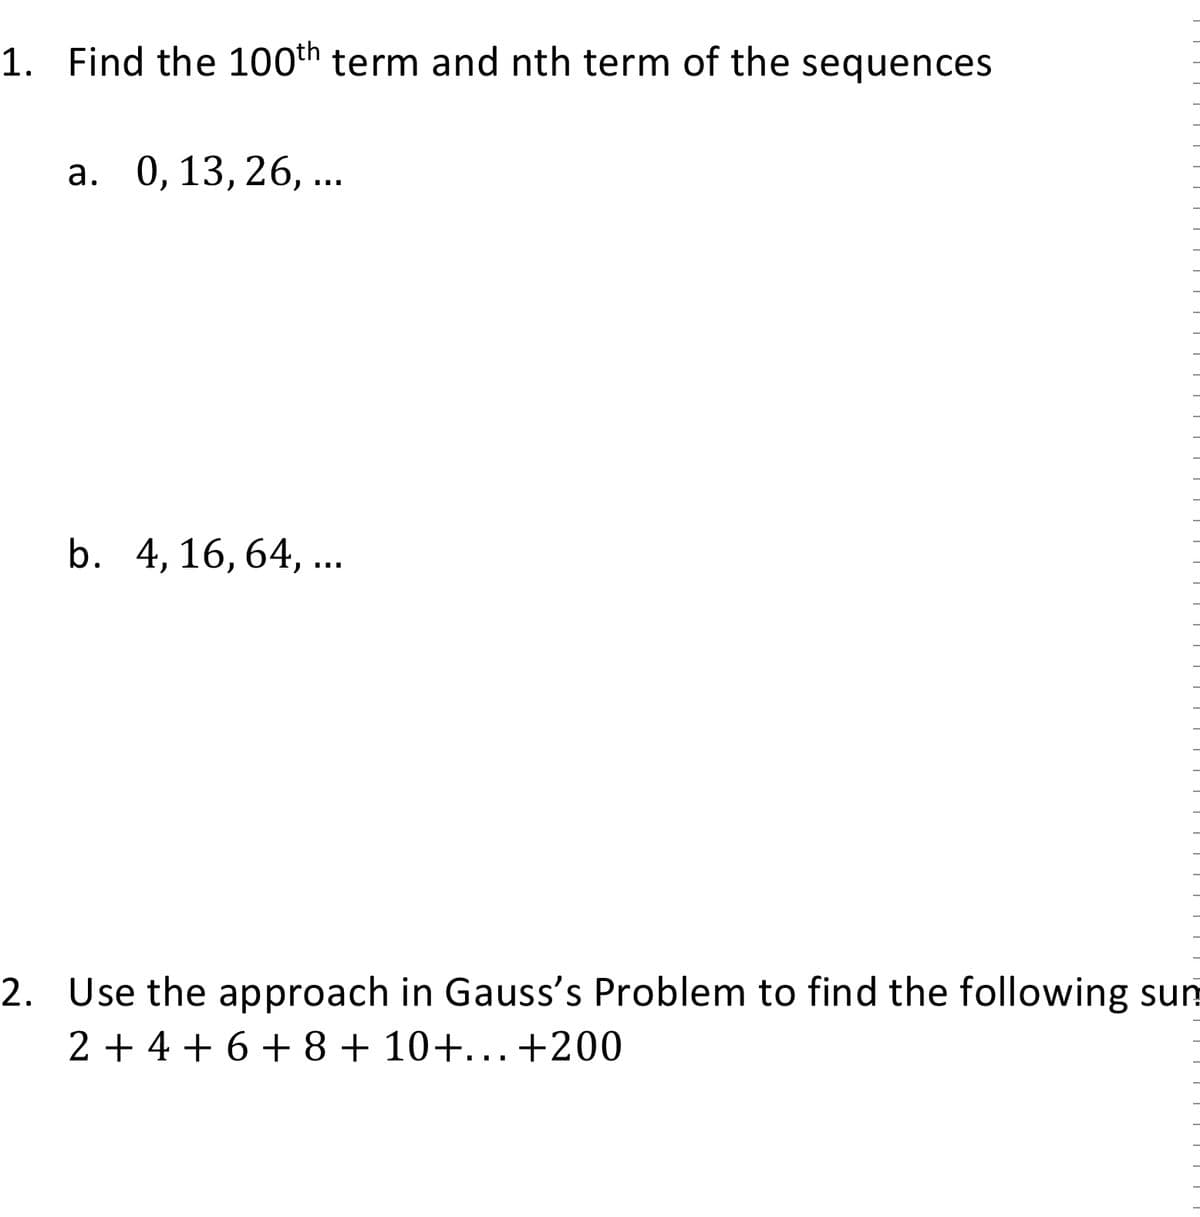 1. Find the 100th term and nth term of the sequences
a. 0, 13, 26, ...
b. 4, 16, 64, ...
2. Use the approach in Gauss's Problem to find the following sun
2 + 4 + 6 + 8 + 10+...+200